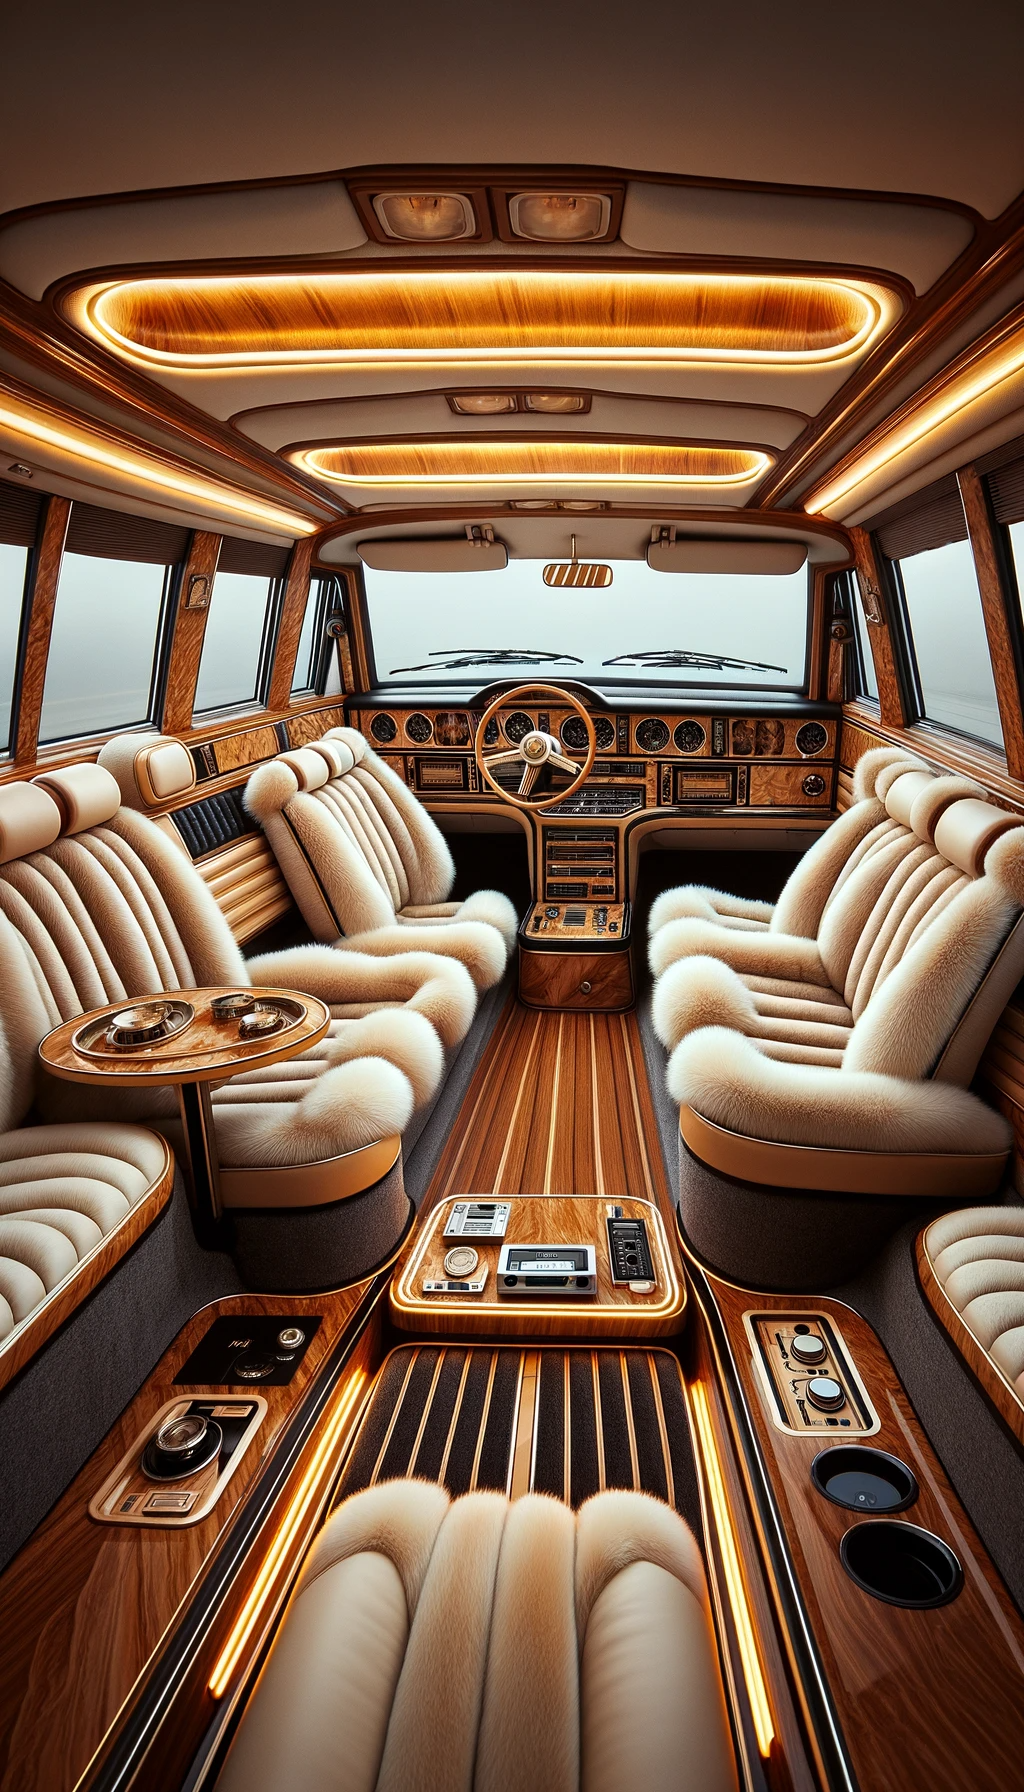 Interior Elegance of the ZiL 41045